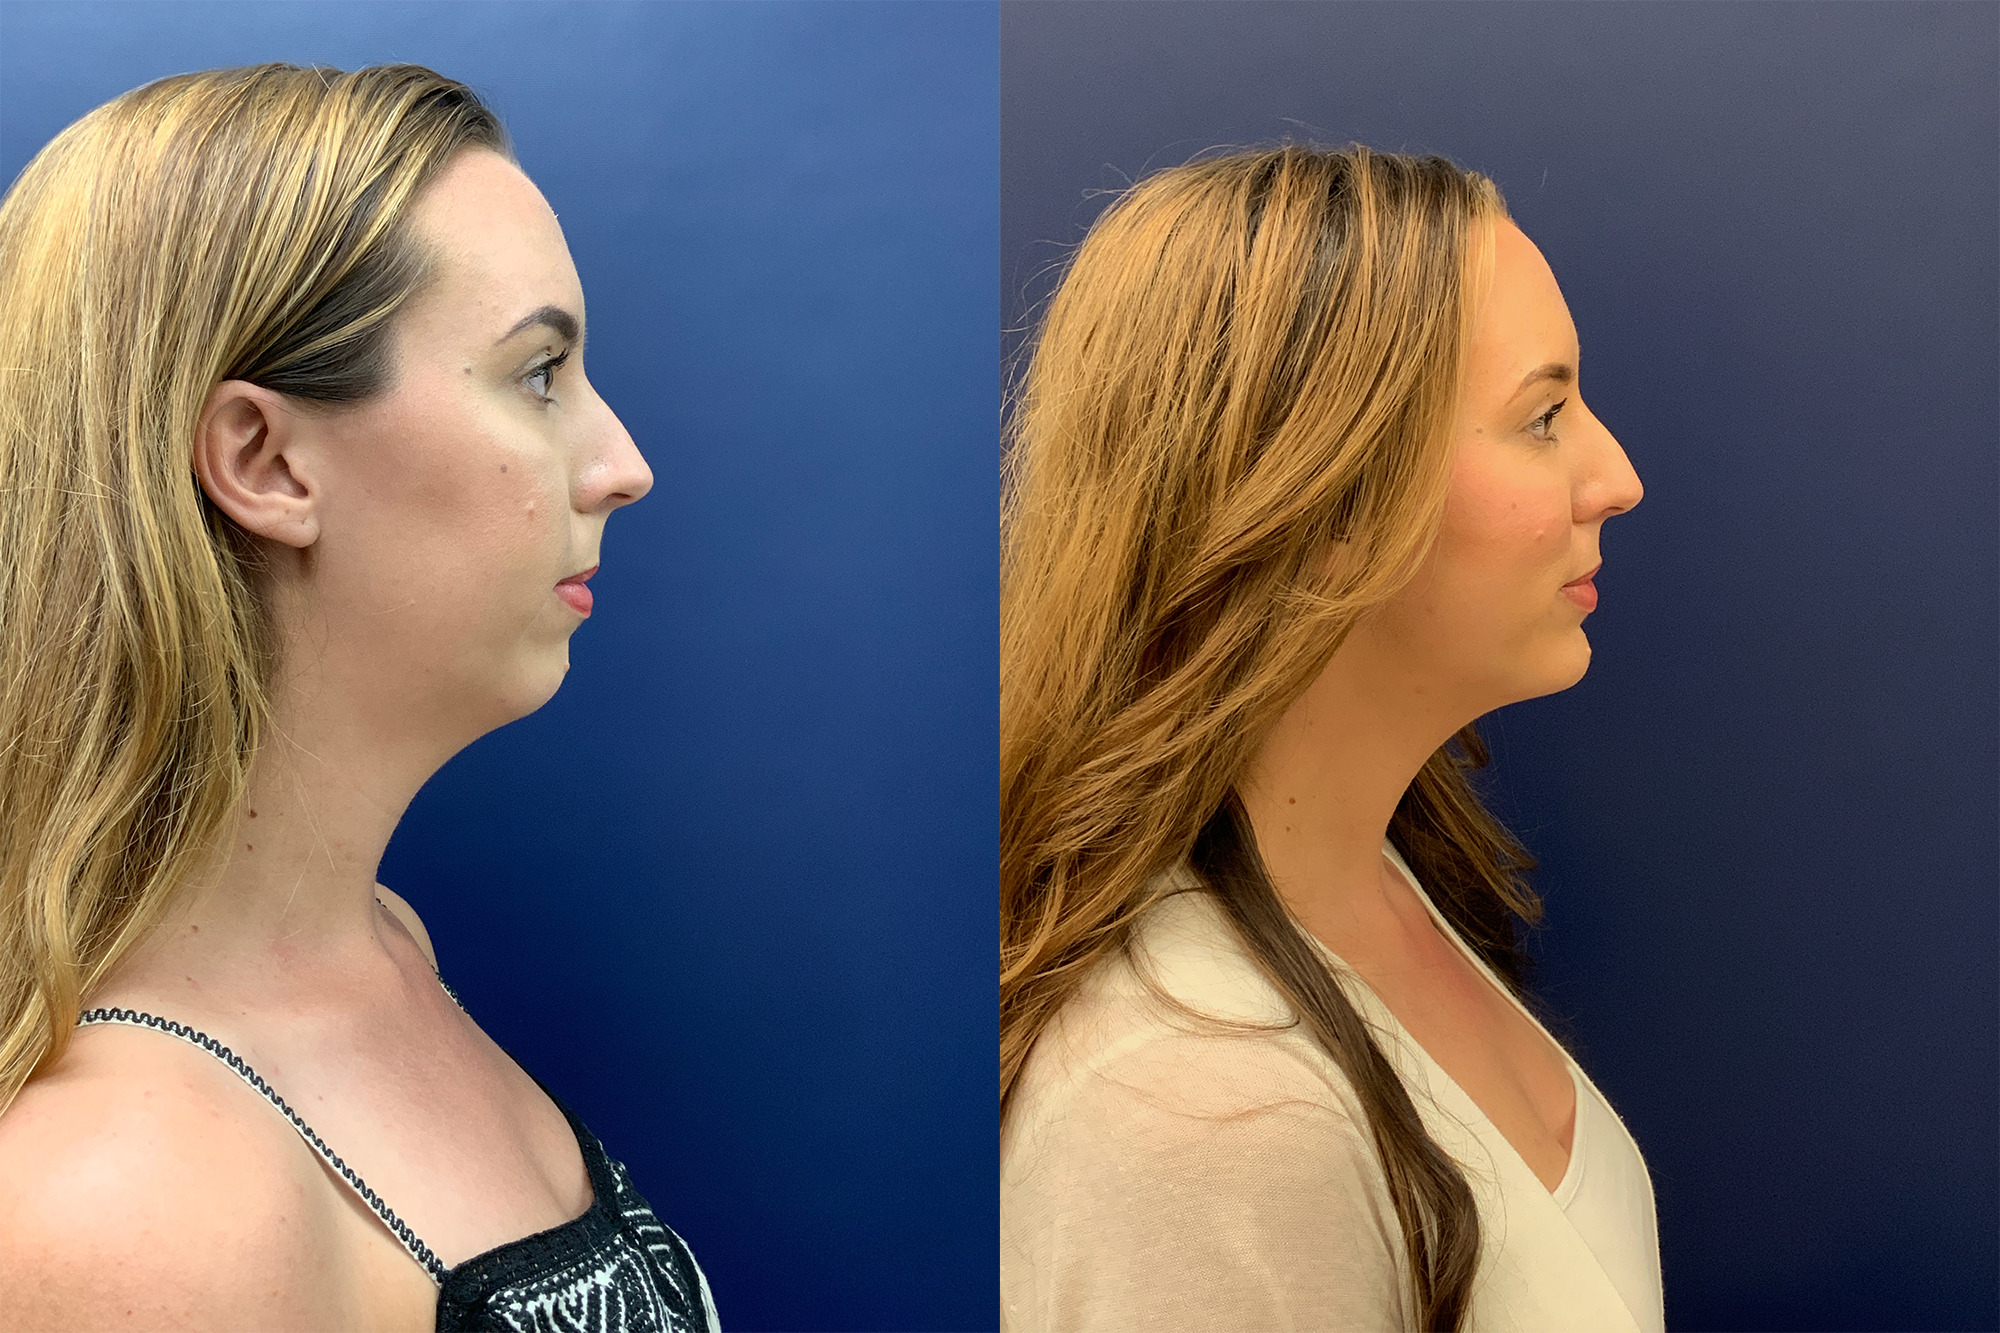 Chin Implant Before and After Photo by Dr. Butler in Pensacola Florida